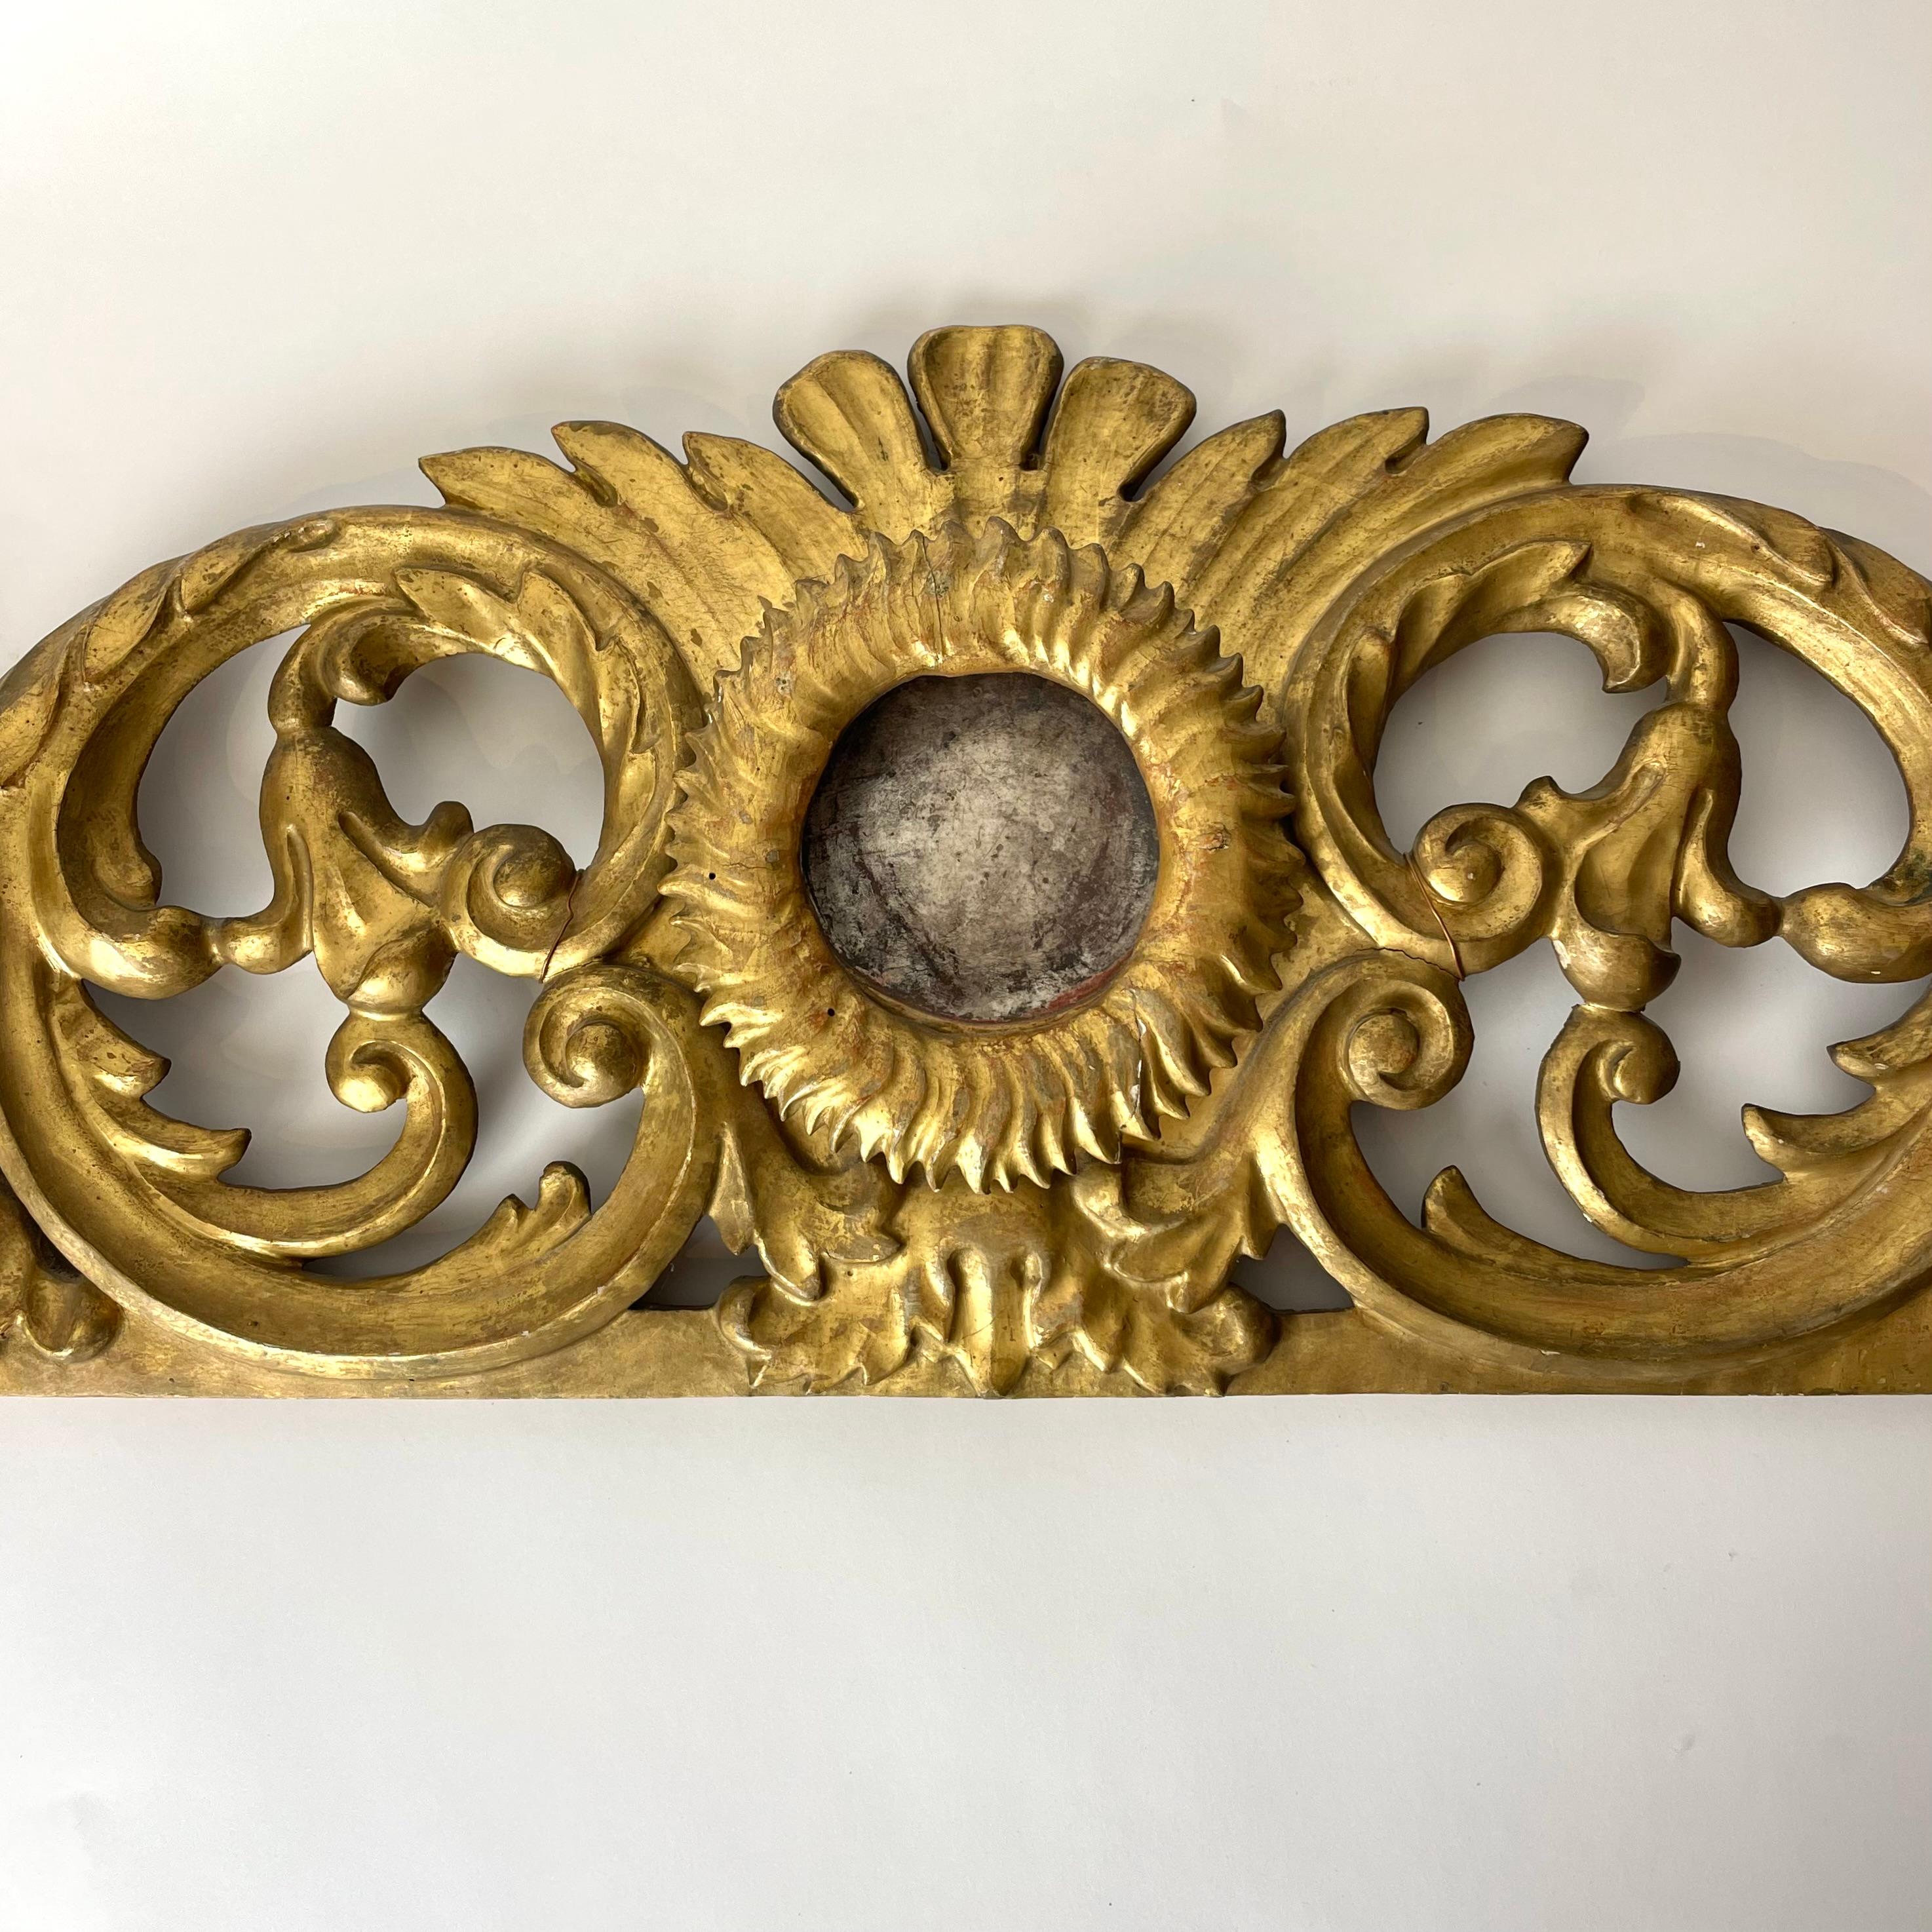 Beautiful Gilt and Silvered Door Moulding Architrave, 18th Century Rococo

This beautiful top door header moulding features intricate detailing in typical Rococo fashion, in the form of flowing leafs in gilt and silvered wood. At the center is a